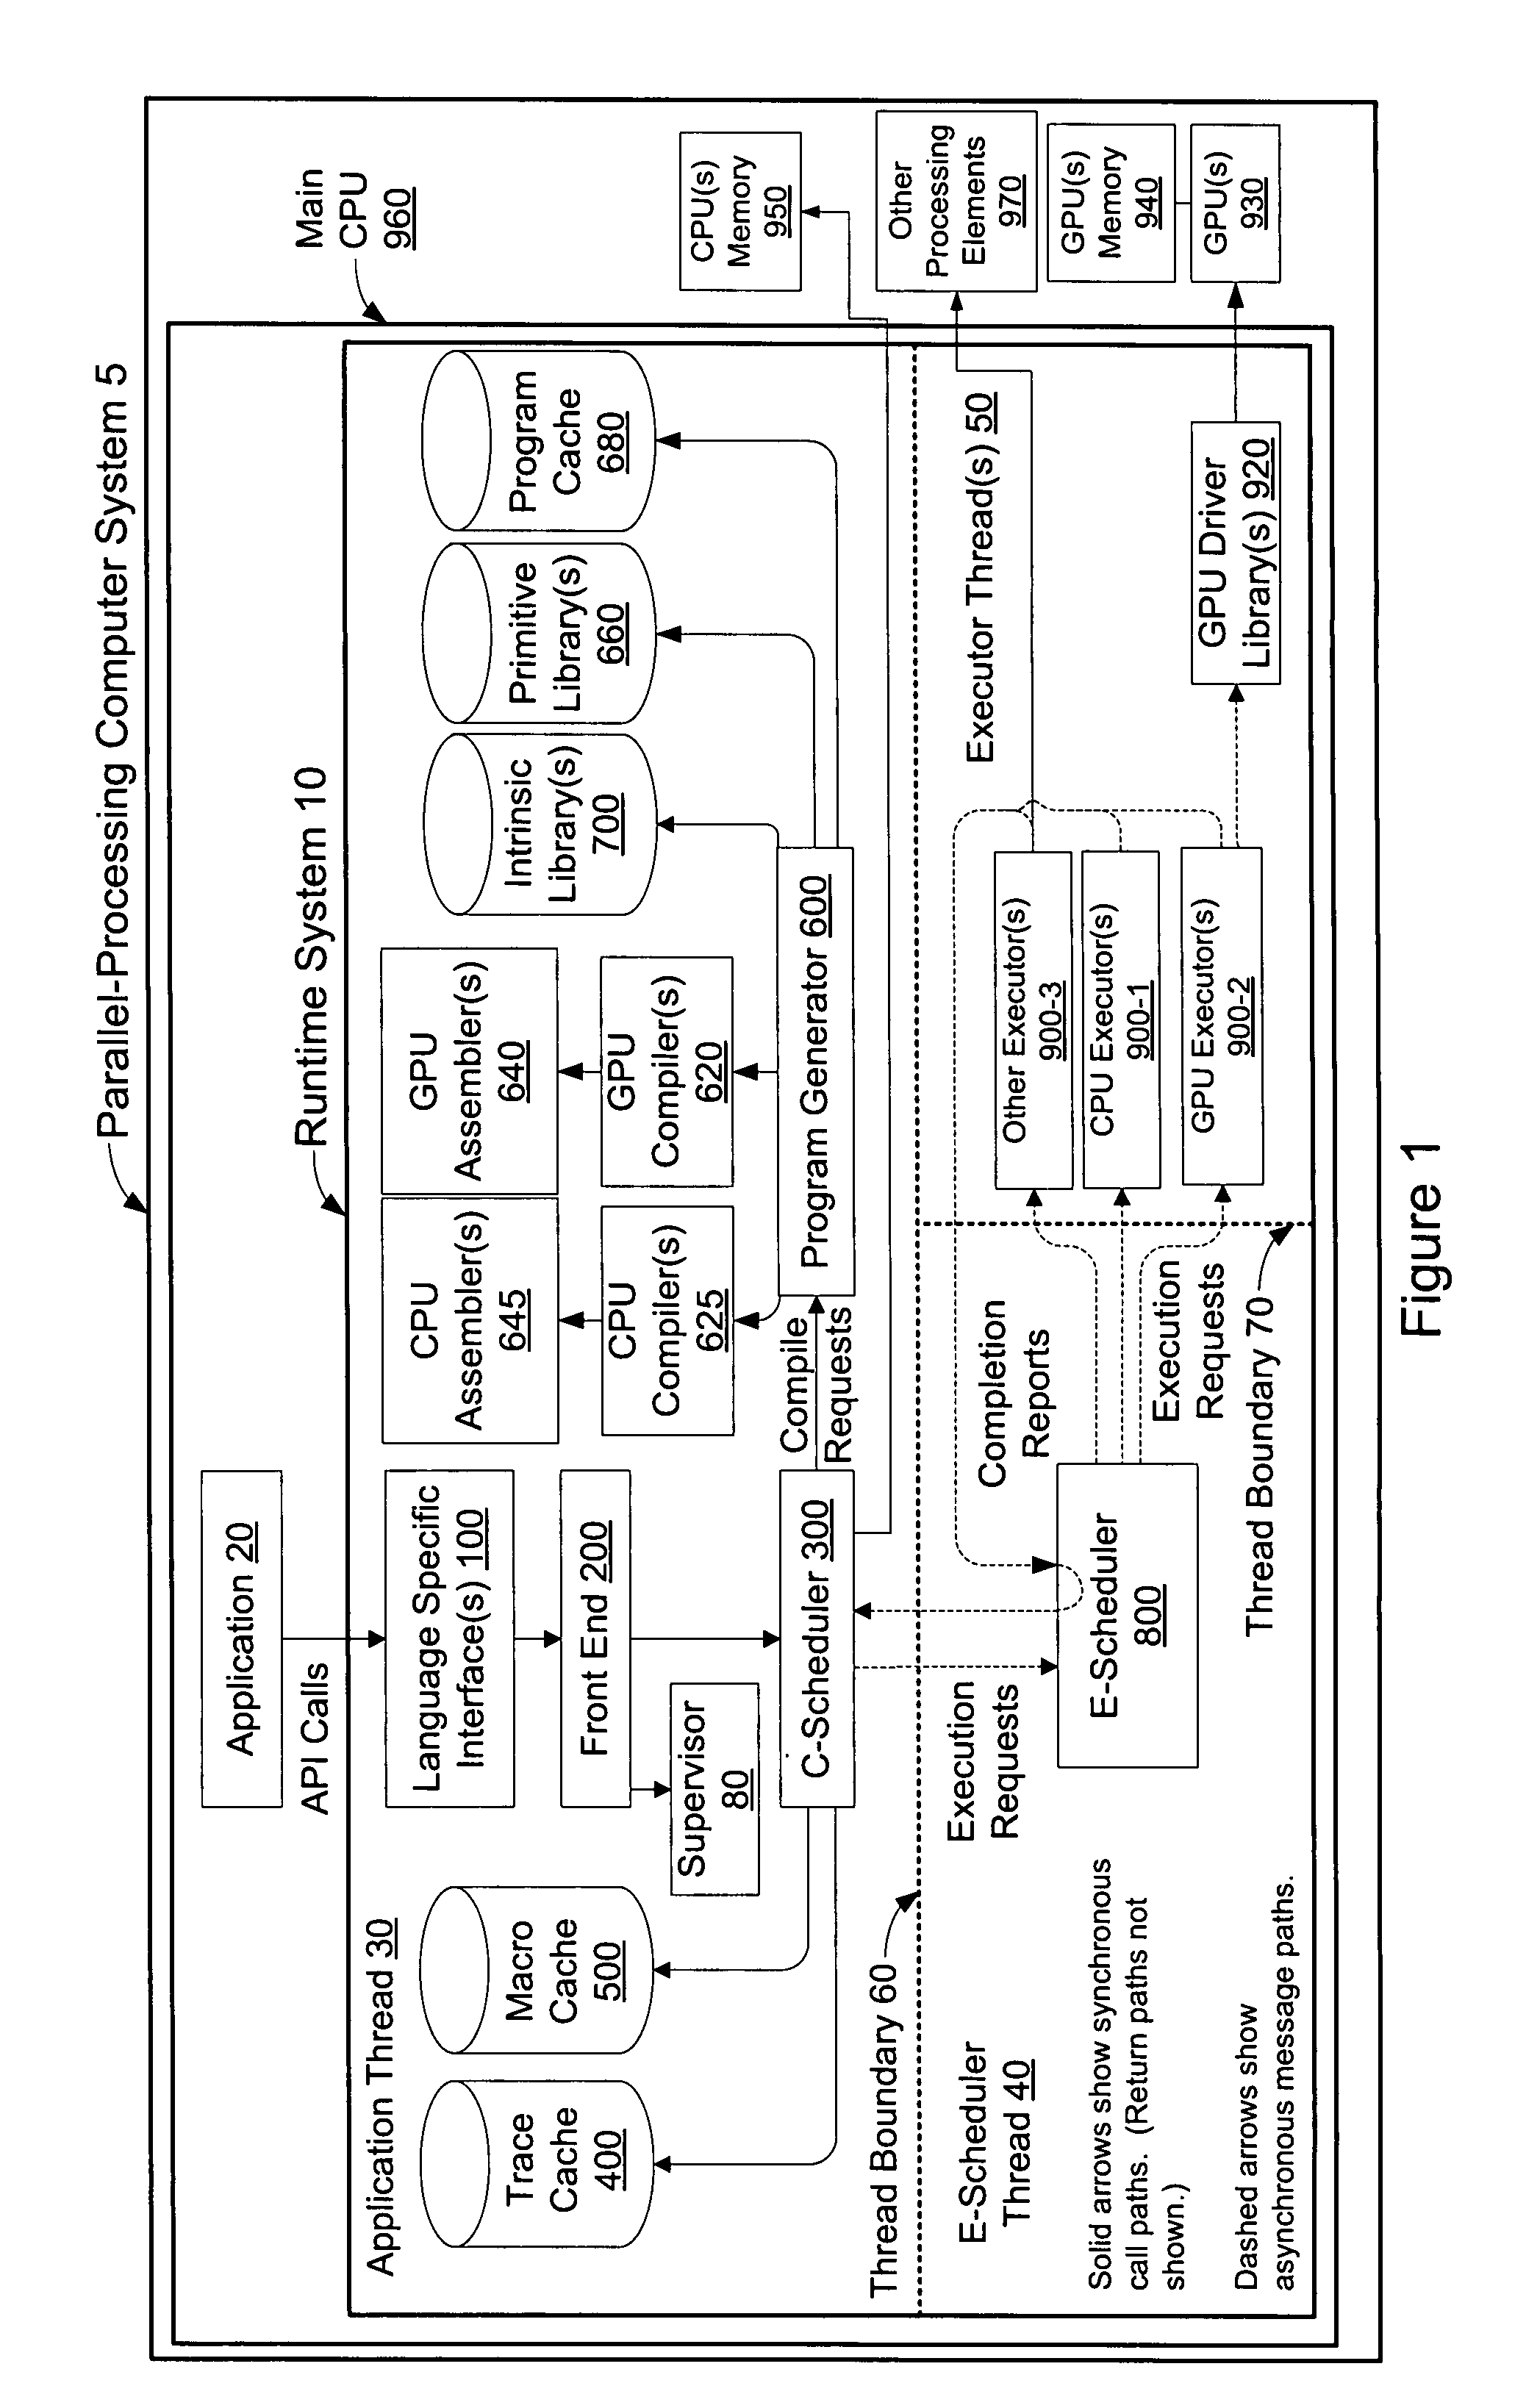 Systems and methods for debugging an application running on a parallel-processing computer system